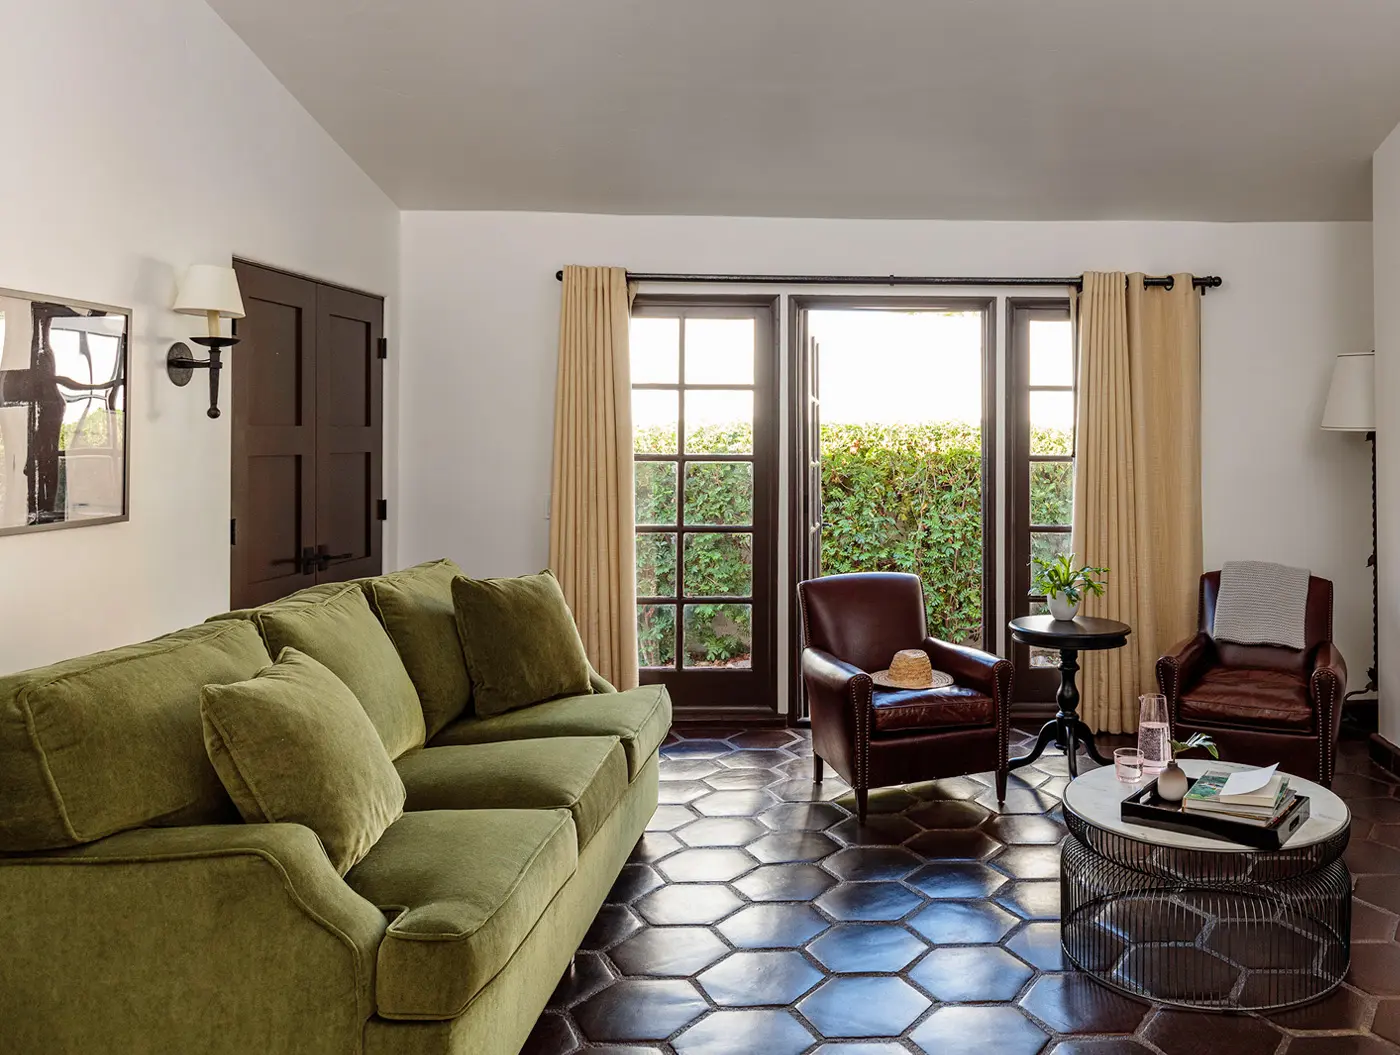 A cozy living room with a green velvet sofa, two brown leather armchairs, hexagonal tile flooring, and French doors opening to greenery. Decor includes a wall sconce, window curtains, a round coffee table with books, and a side table with a vase.